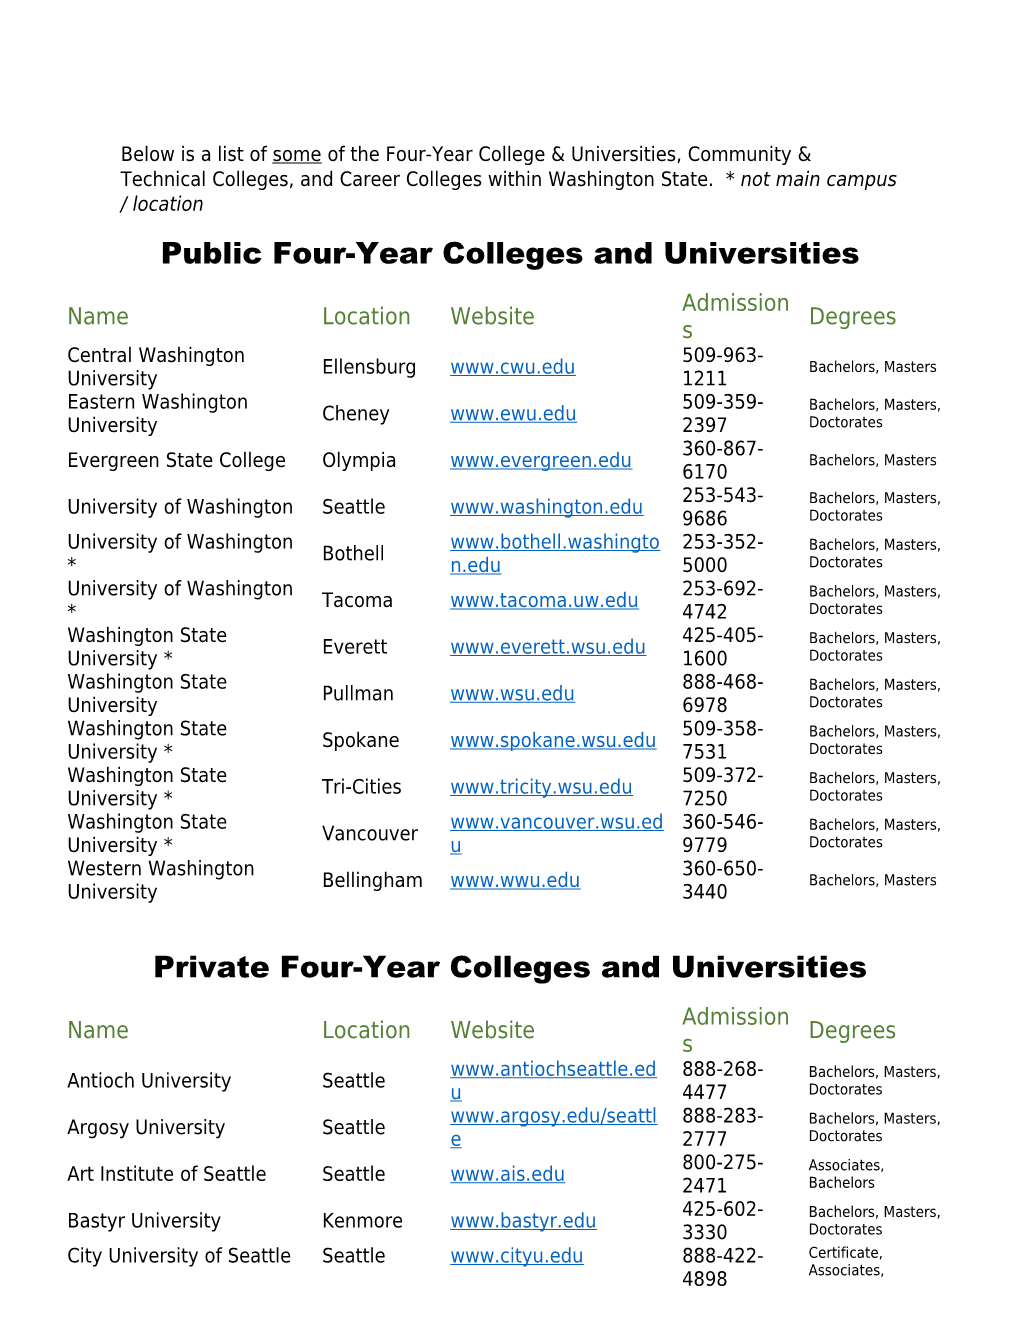 Public Four-Year Colleges and Universities